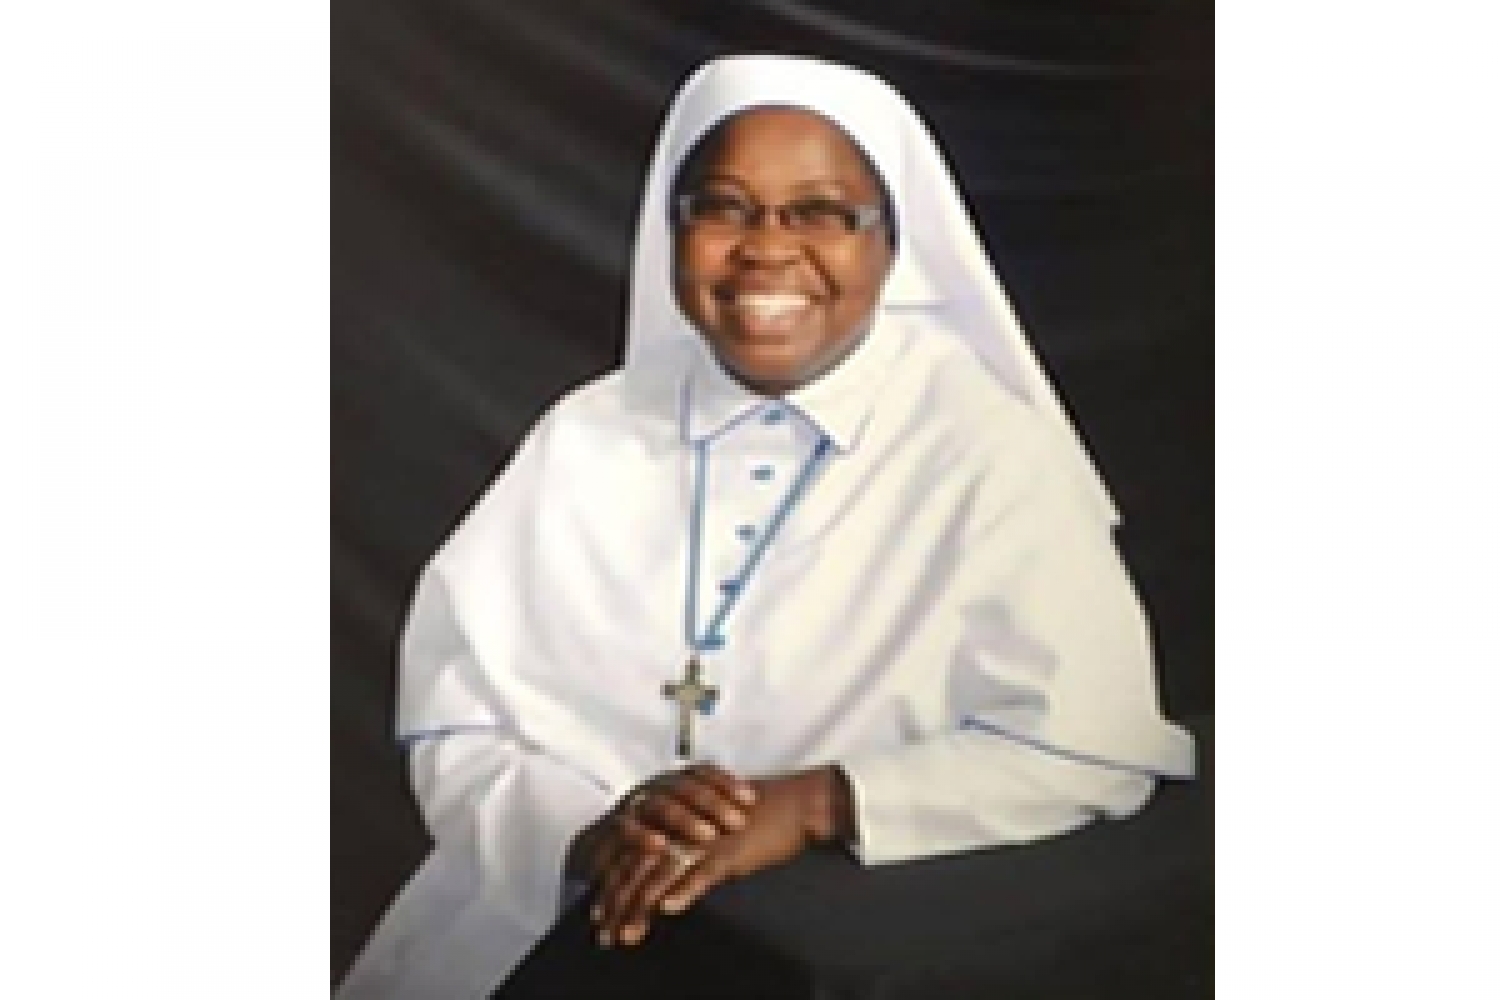 RIP Sr Irene. She was a member of the UEC Social Communications Commission